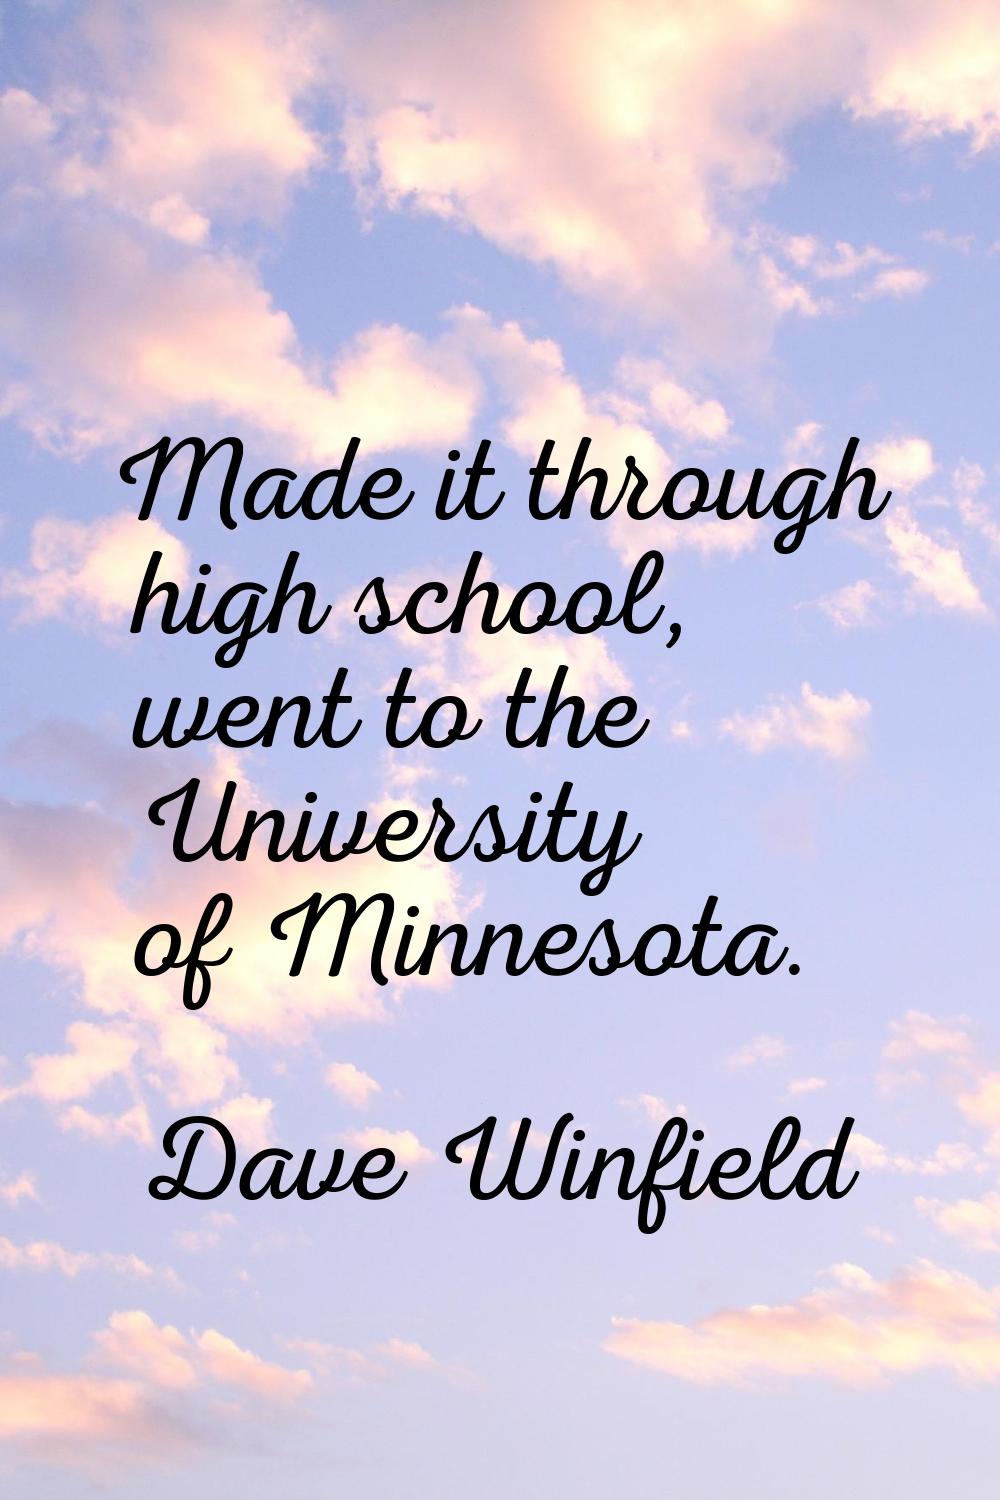 Made it through high school, went to the University of Minnesota.